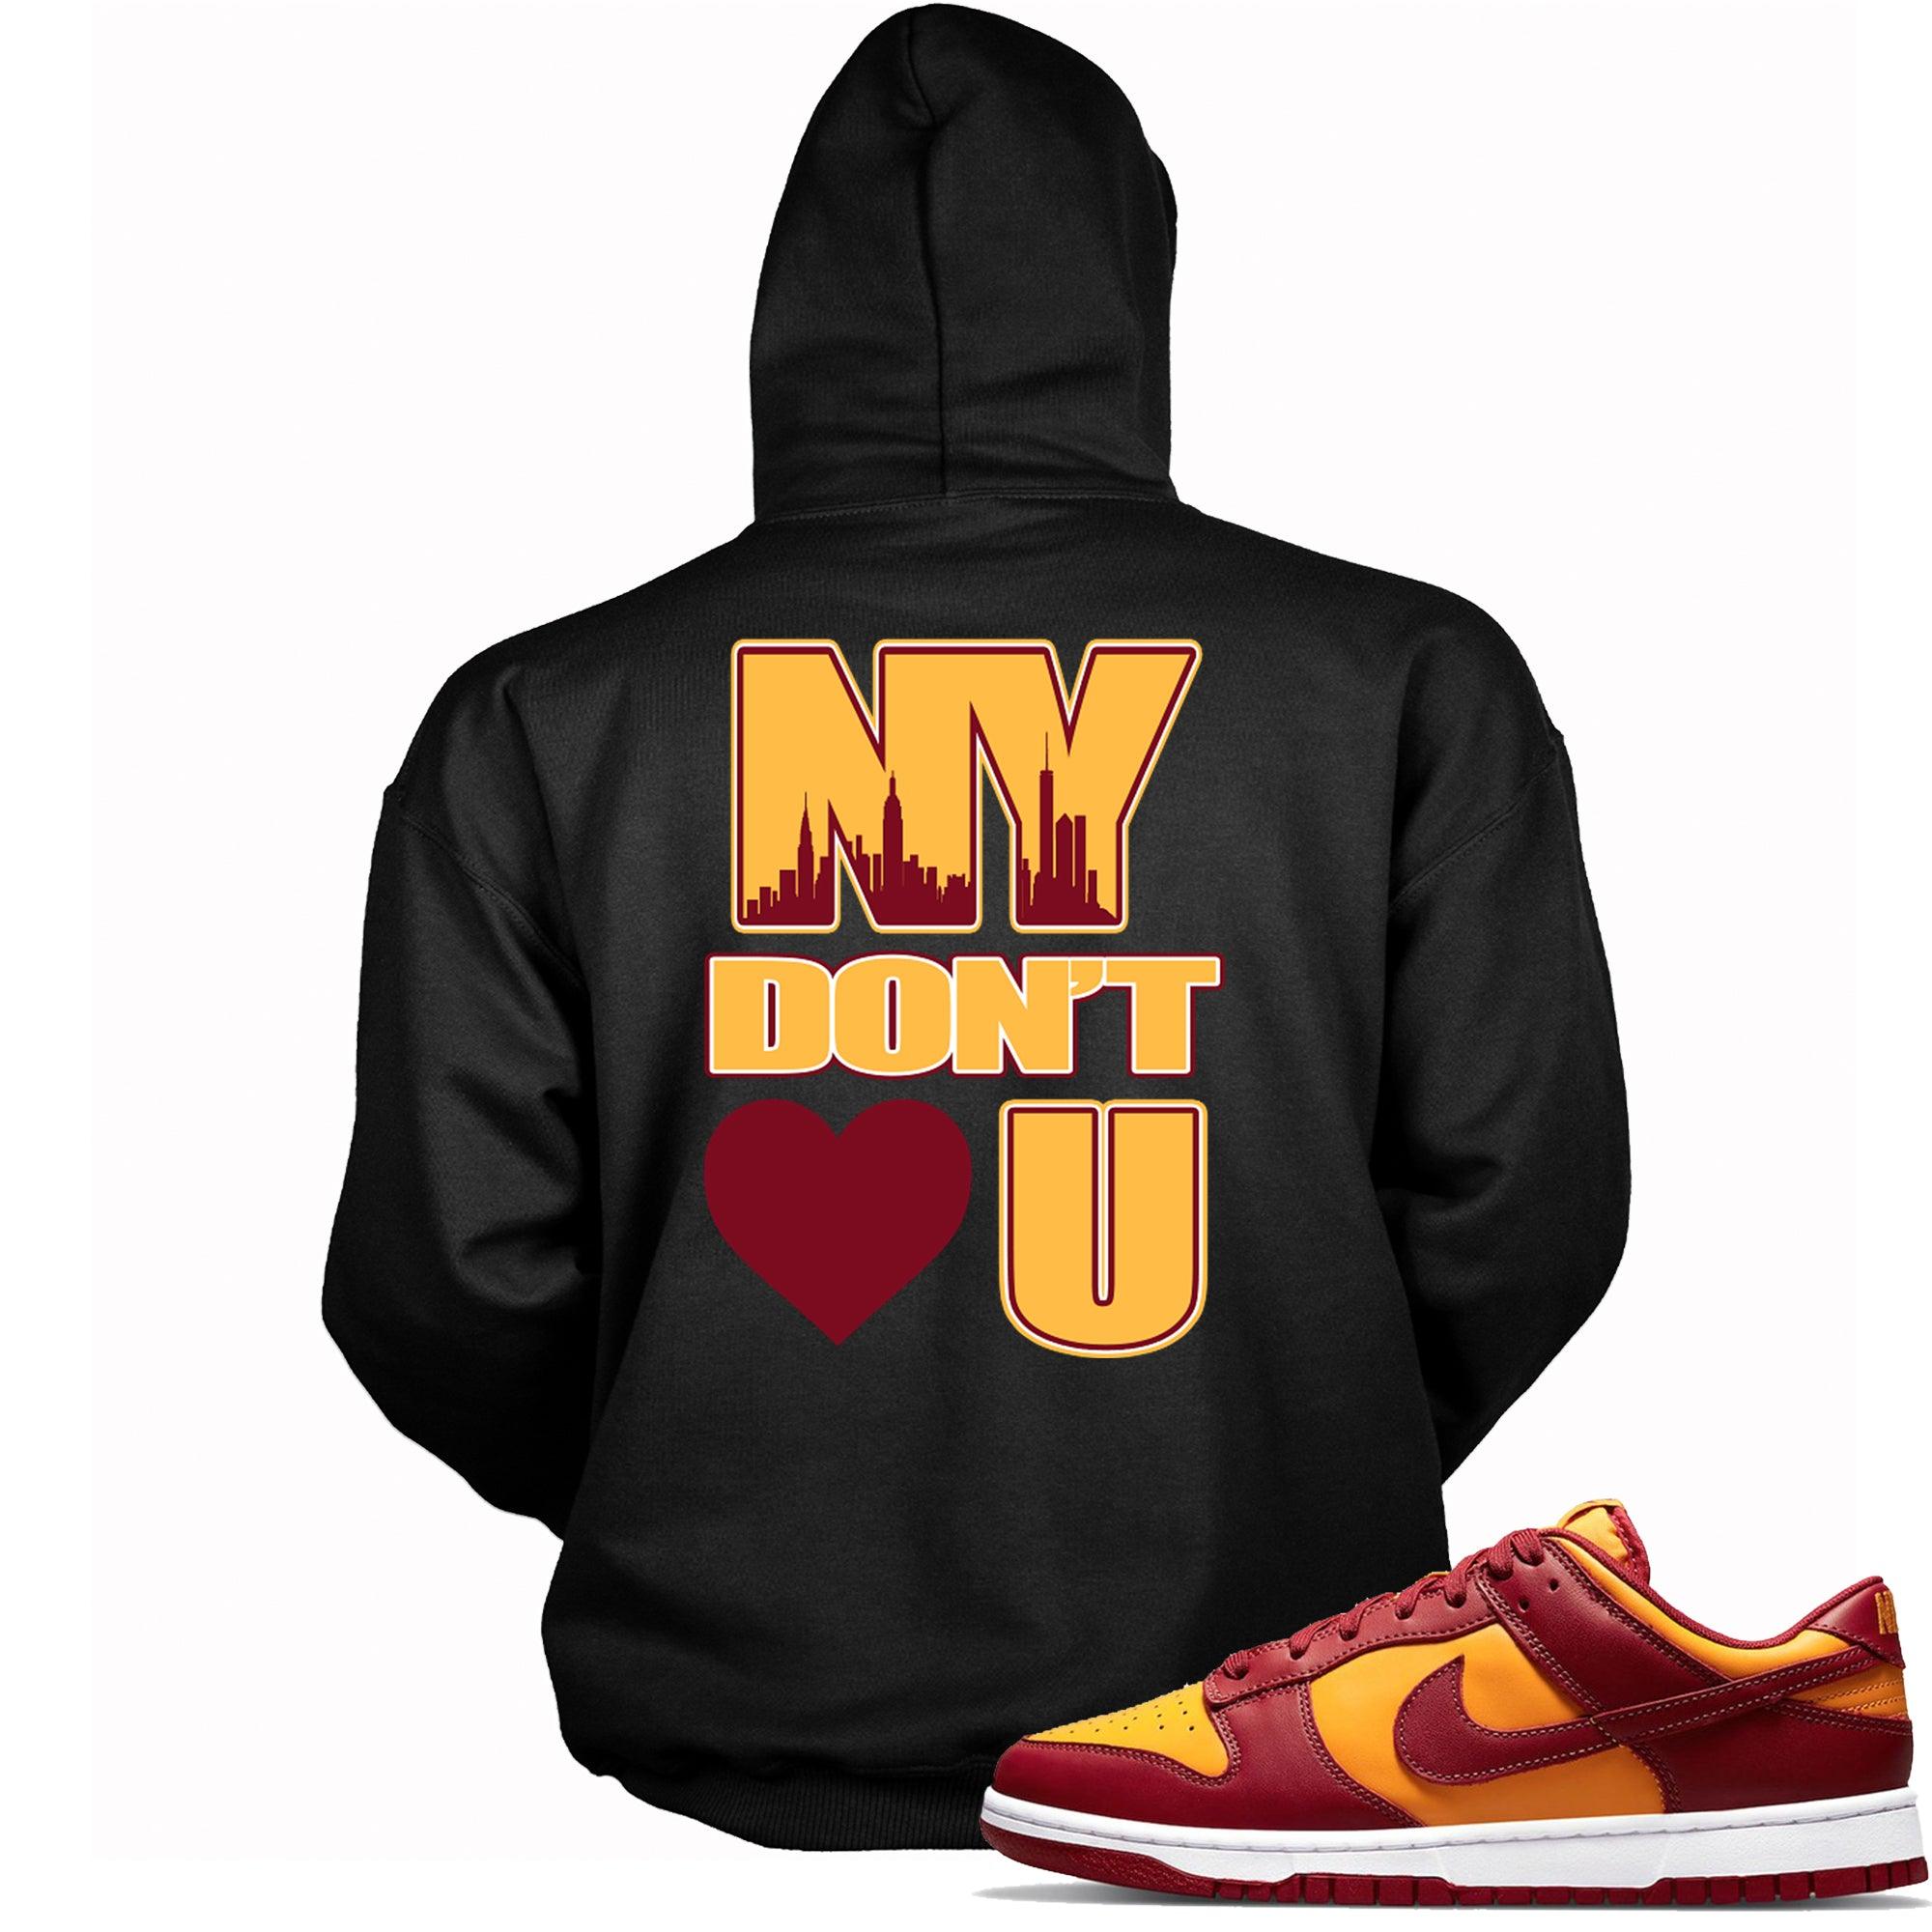 NY Don't Love You Hoodie Nike Dunk Midas Gold Sneakers photo